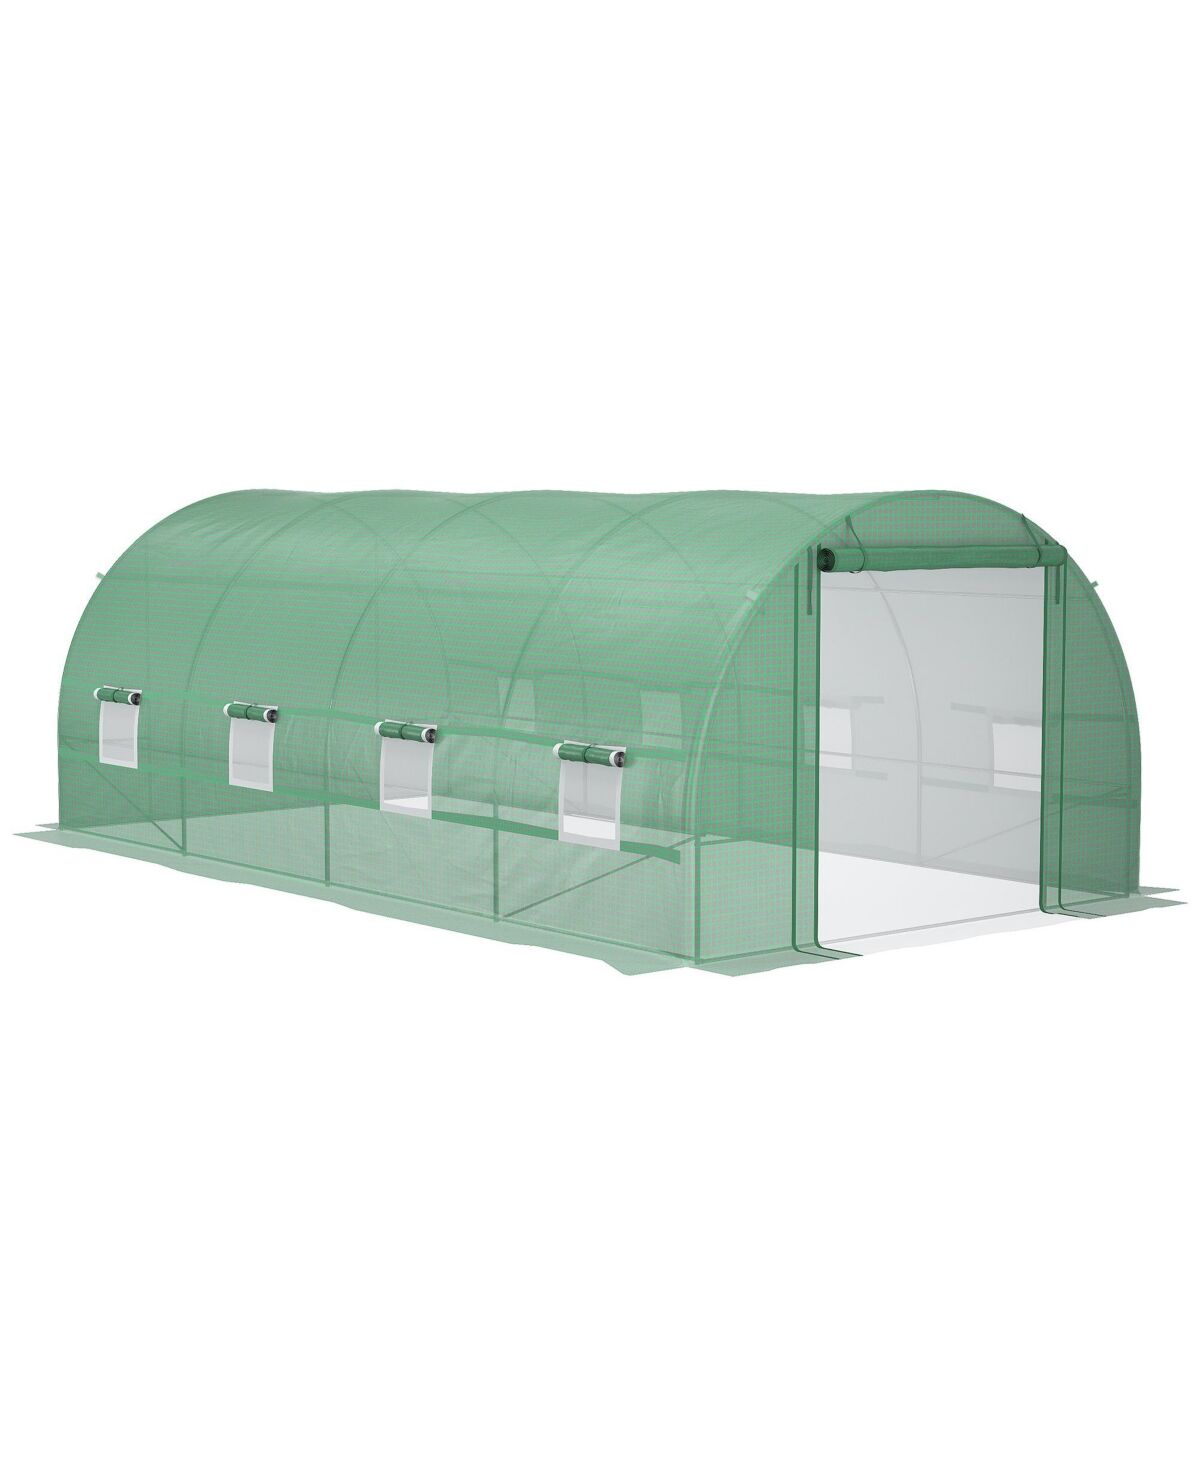 Outsunny 20' x 10' x 7' Walk-In Tunnel Greenhouse, Large Garden Hot House Kit with 8 Roll-up Windows & Roll Up Door, Steel Frame, Green - Green